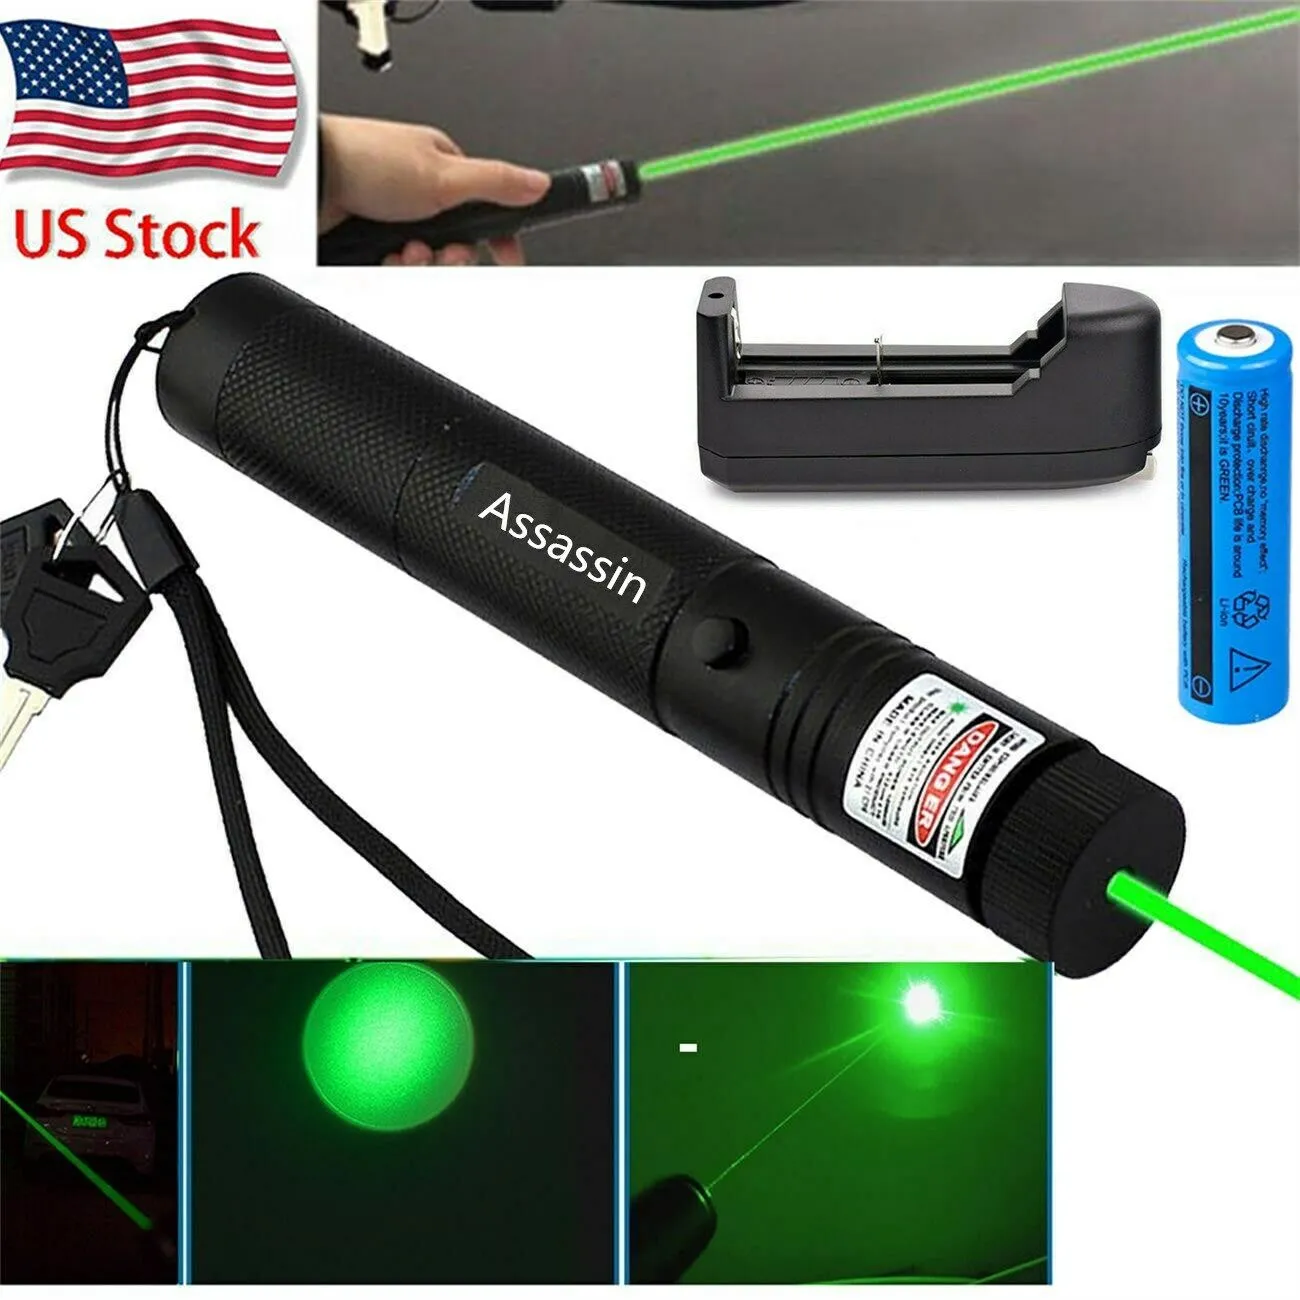 Astronomy Teaching Focus Burning Powerful Green Laser Pen Pointer 1mw 532nm Visible Beam Cat Toy Military Green Laser+18650 Battery+Charger